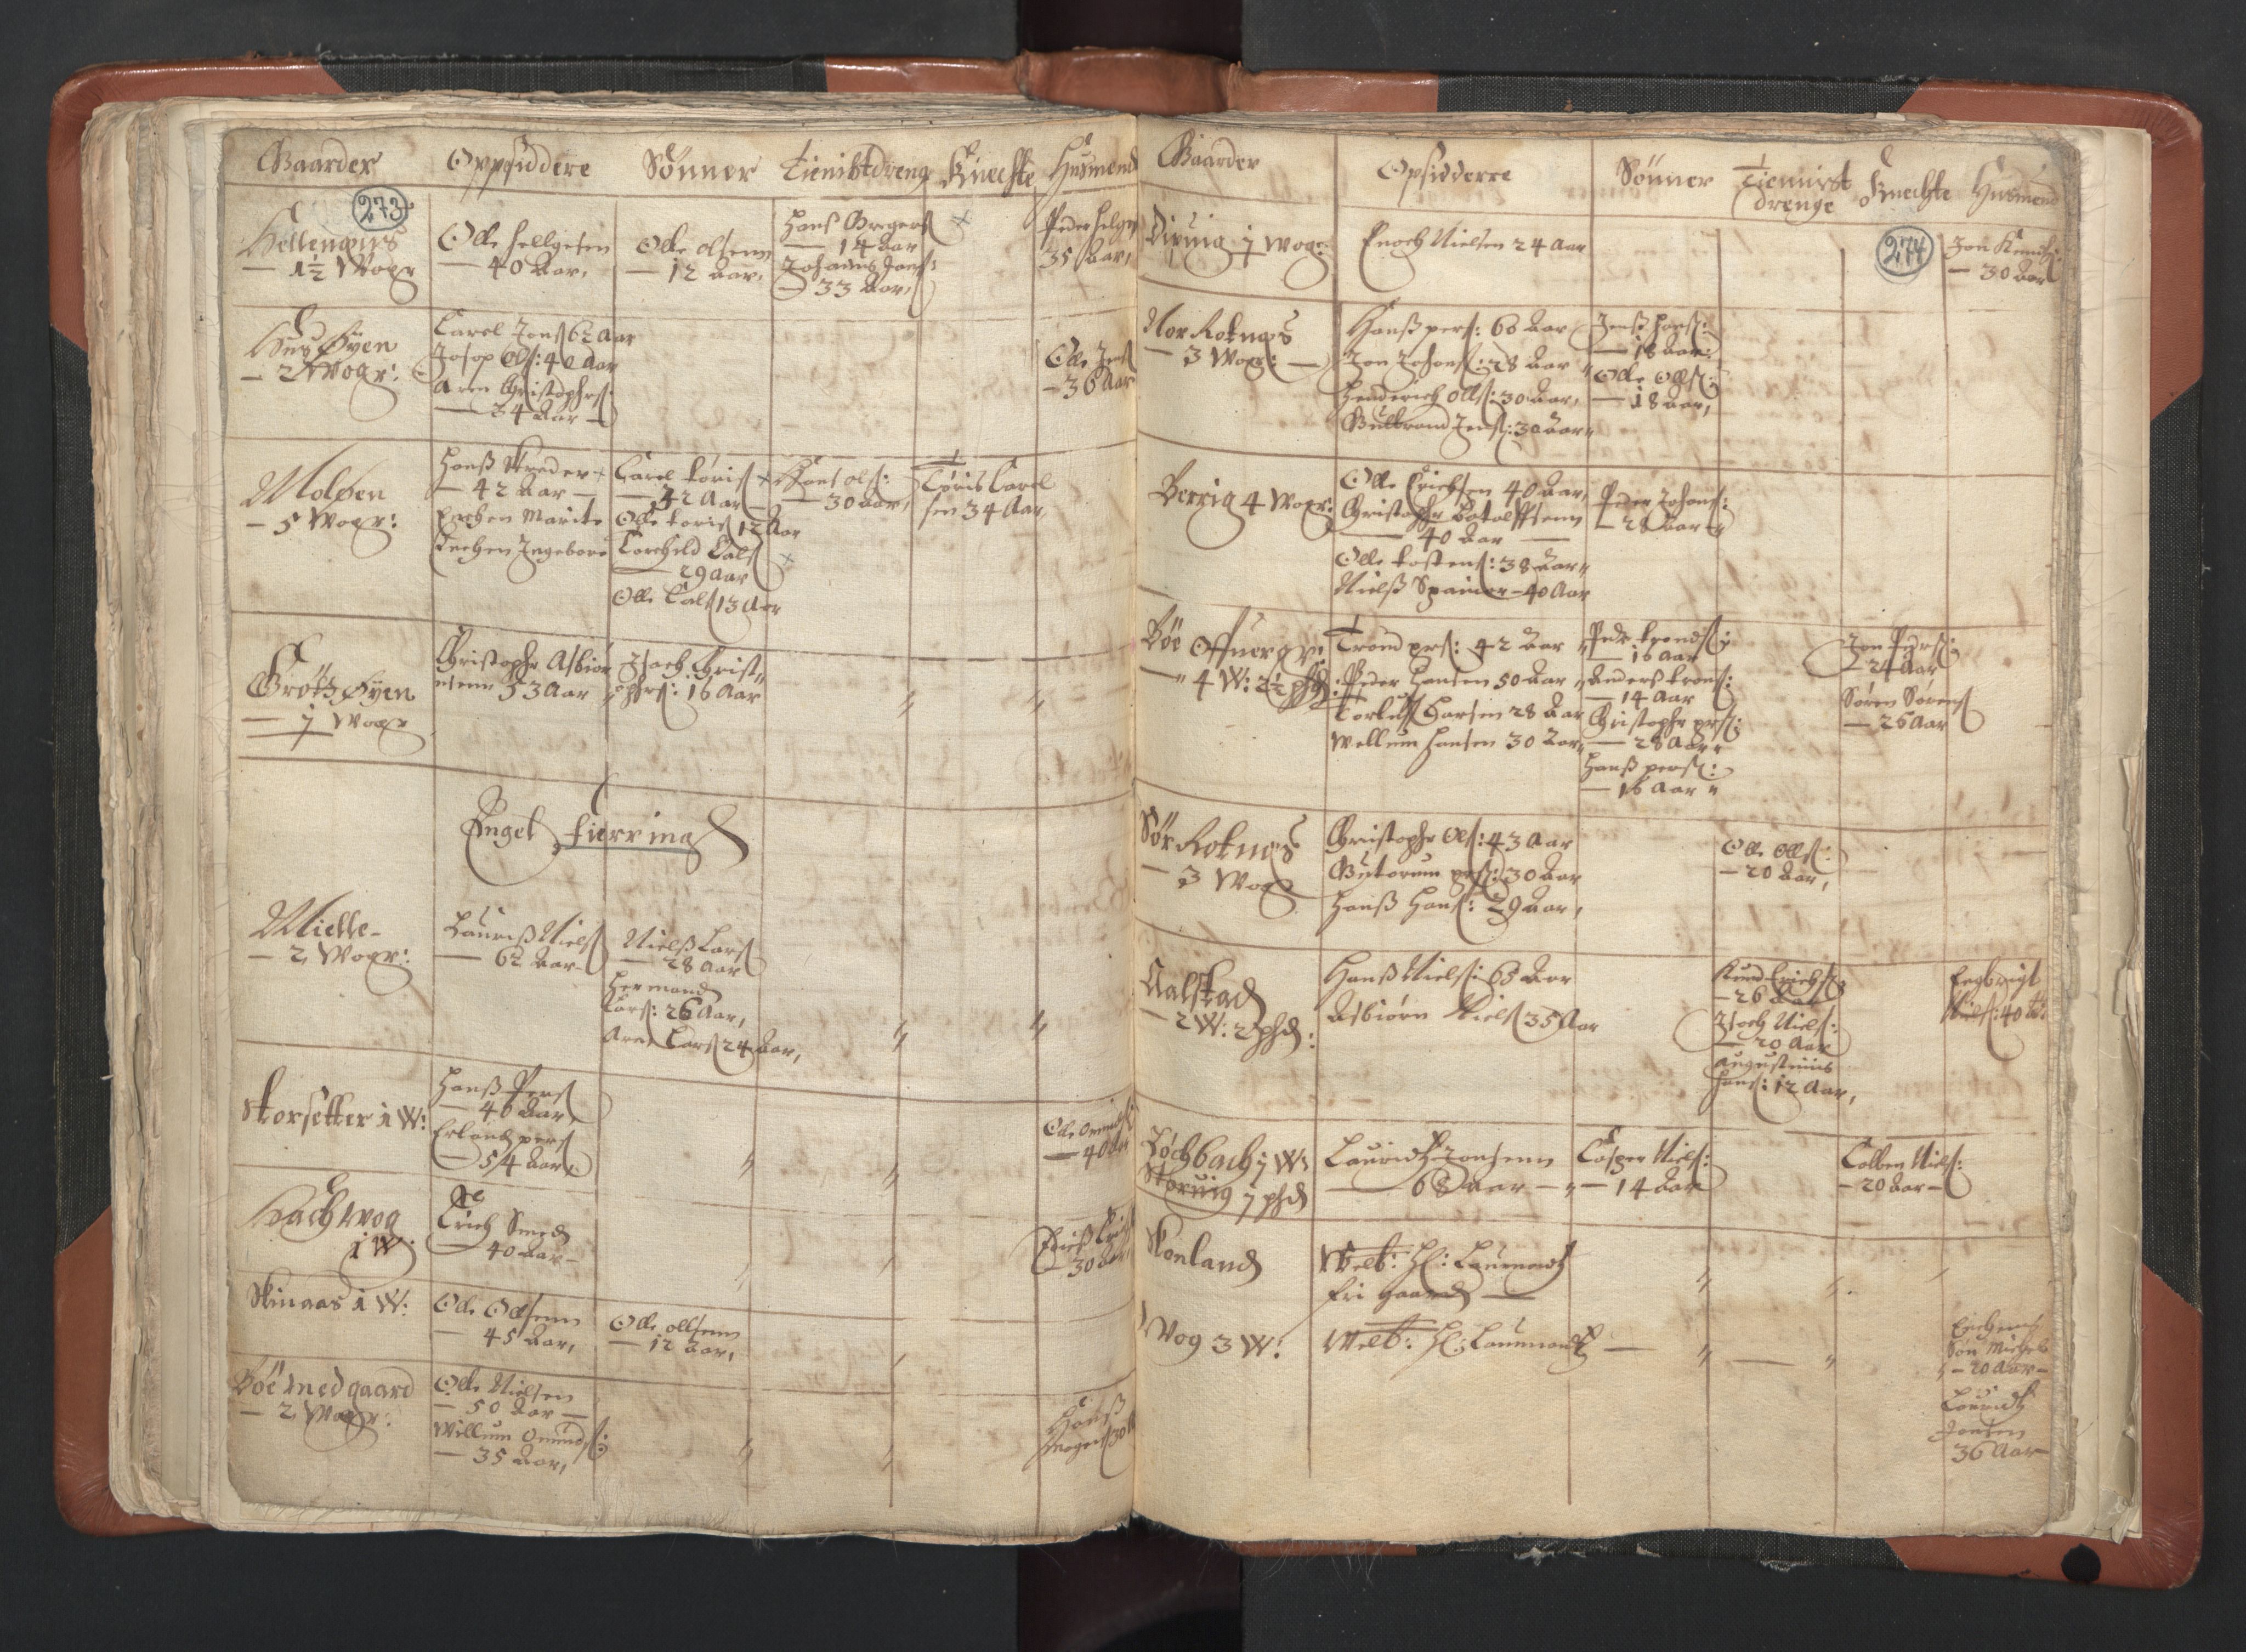 RA, Vicar's Census 1664-1666, no. 35: Helgeland deanery and Salten deanery, 1664-1666, p. 273-274